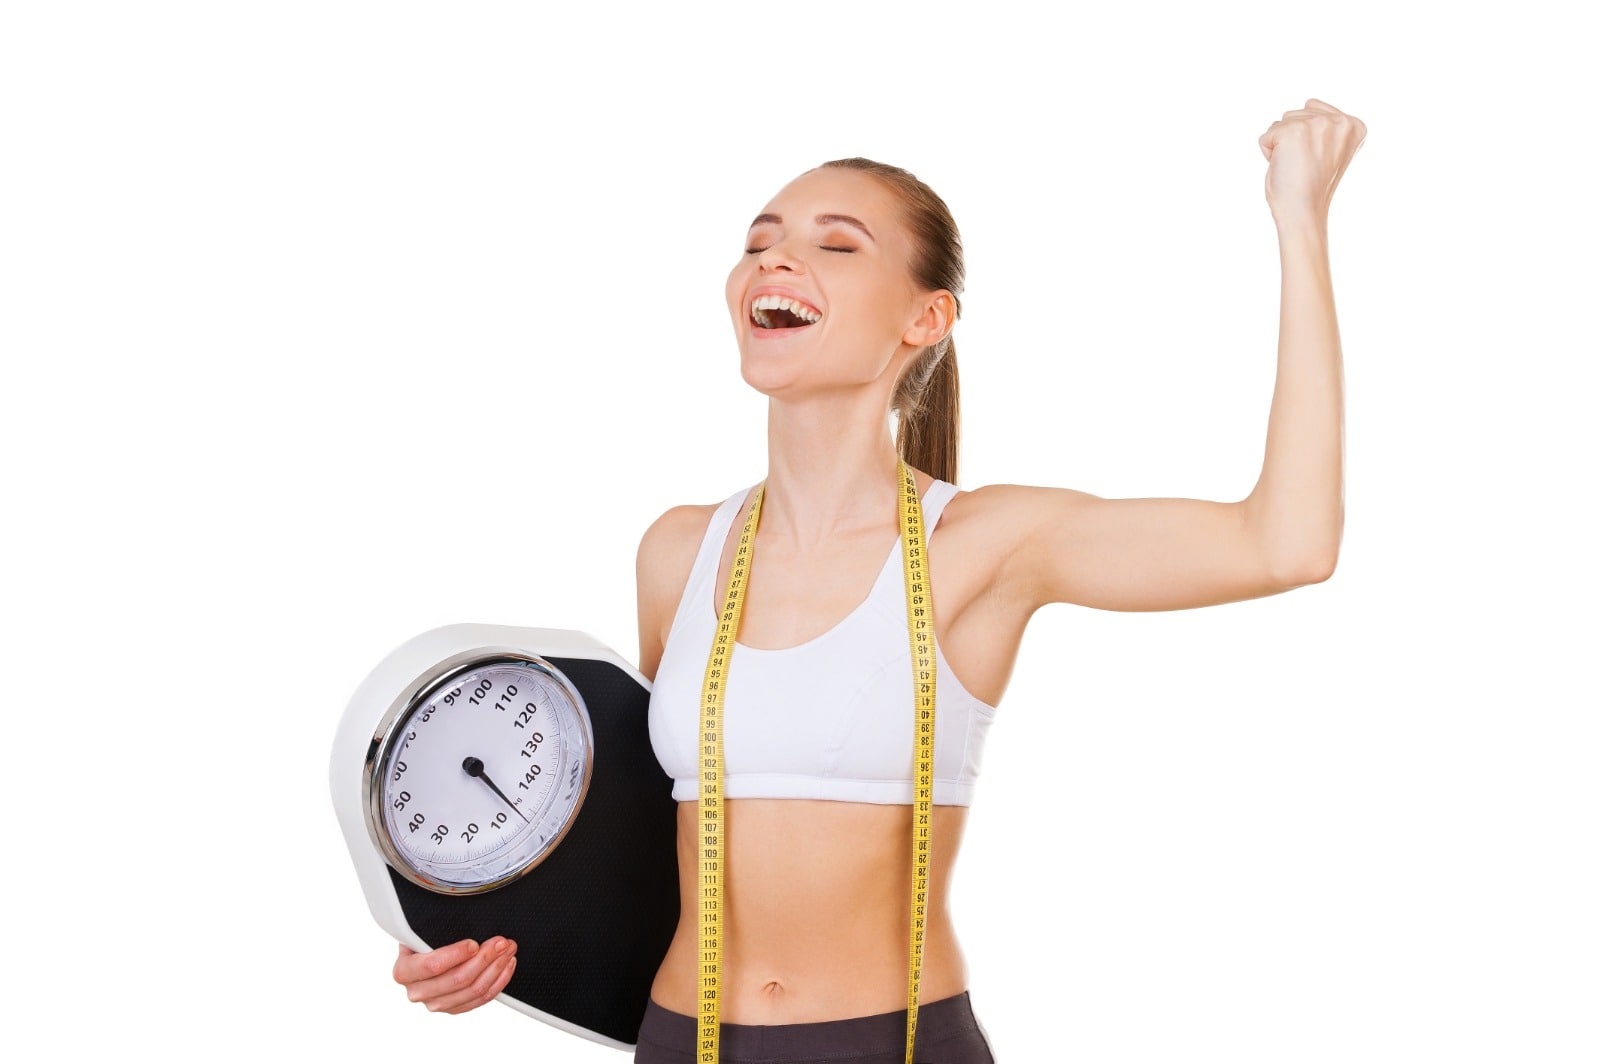 Amycretin a promising future weight loss leader